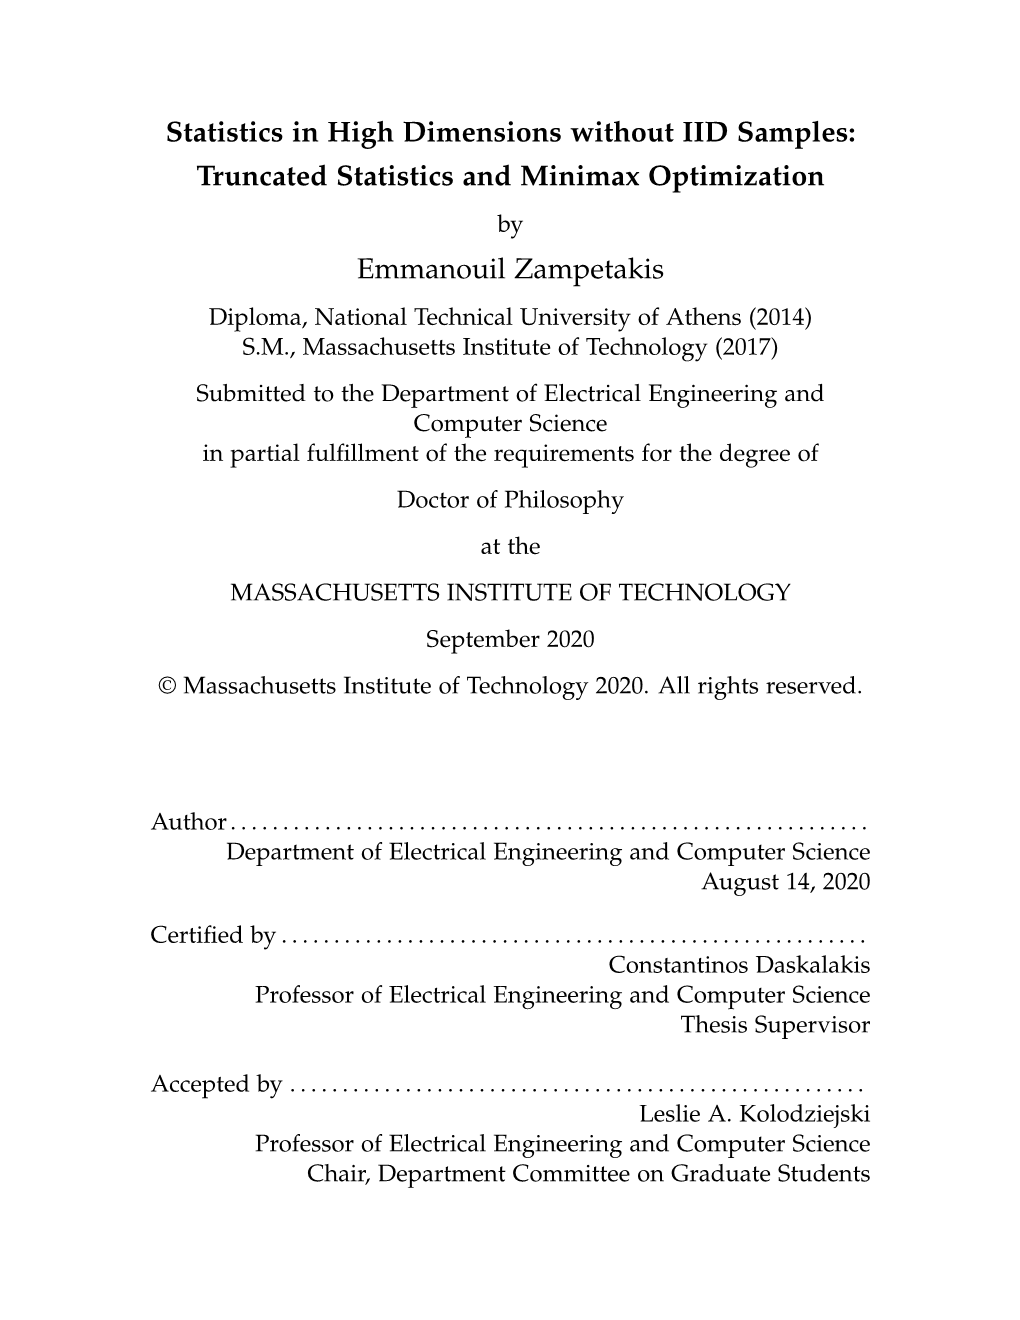 Statistics in High Dimensions Without IID Samples: Truncated Statistics and Minimax Optimization Emmanouil Zampetakis